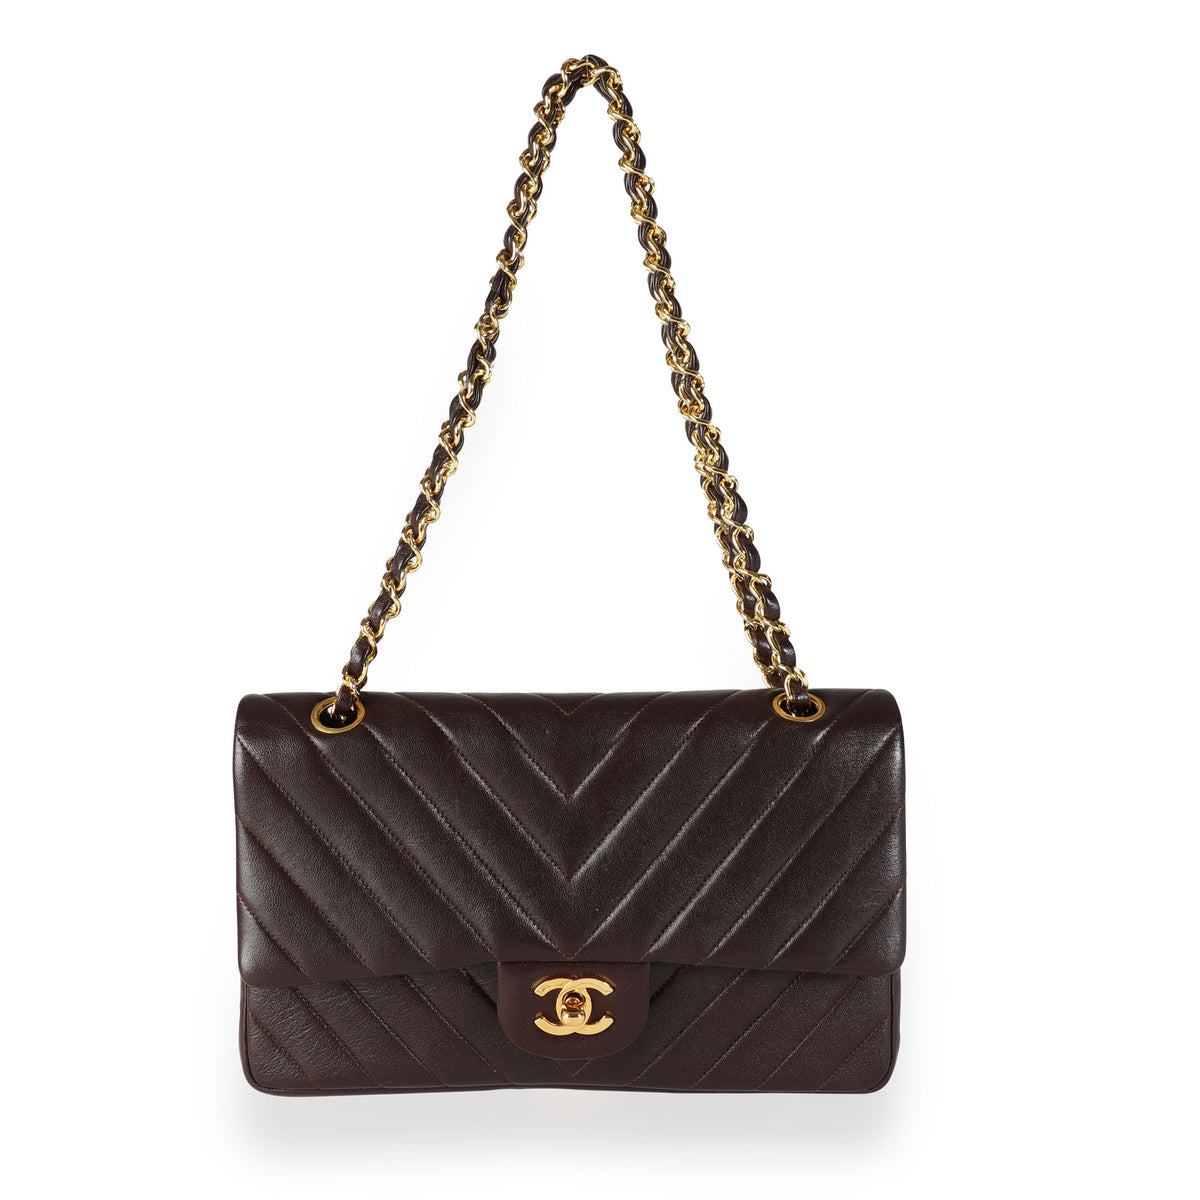 Chanel Vintage Medium Double Flap Bag in Black Chevron Quilted Lambskin -  SOLD